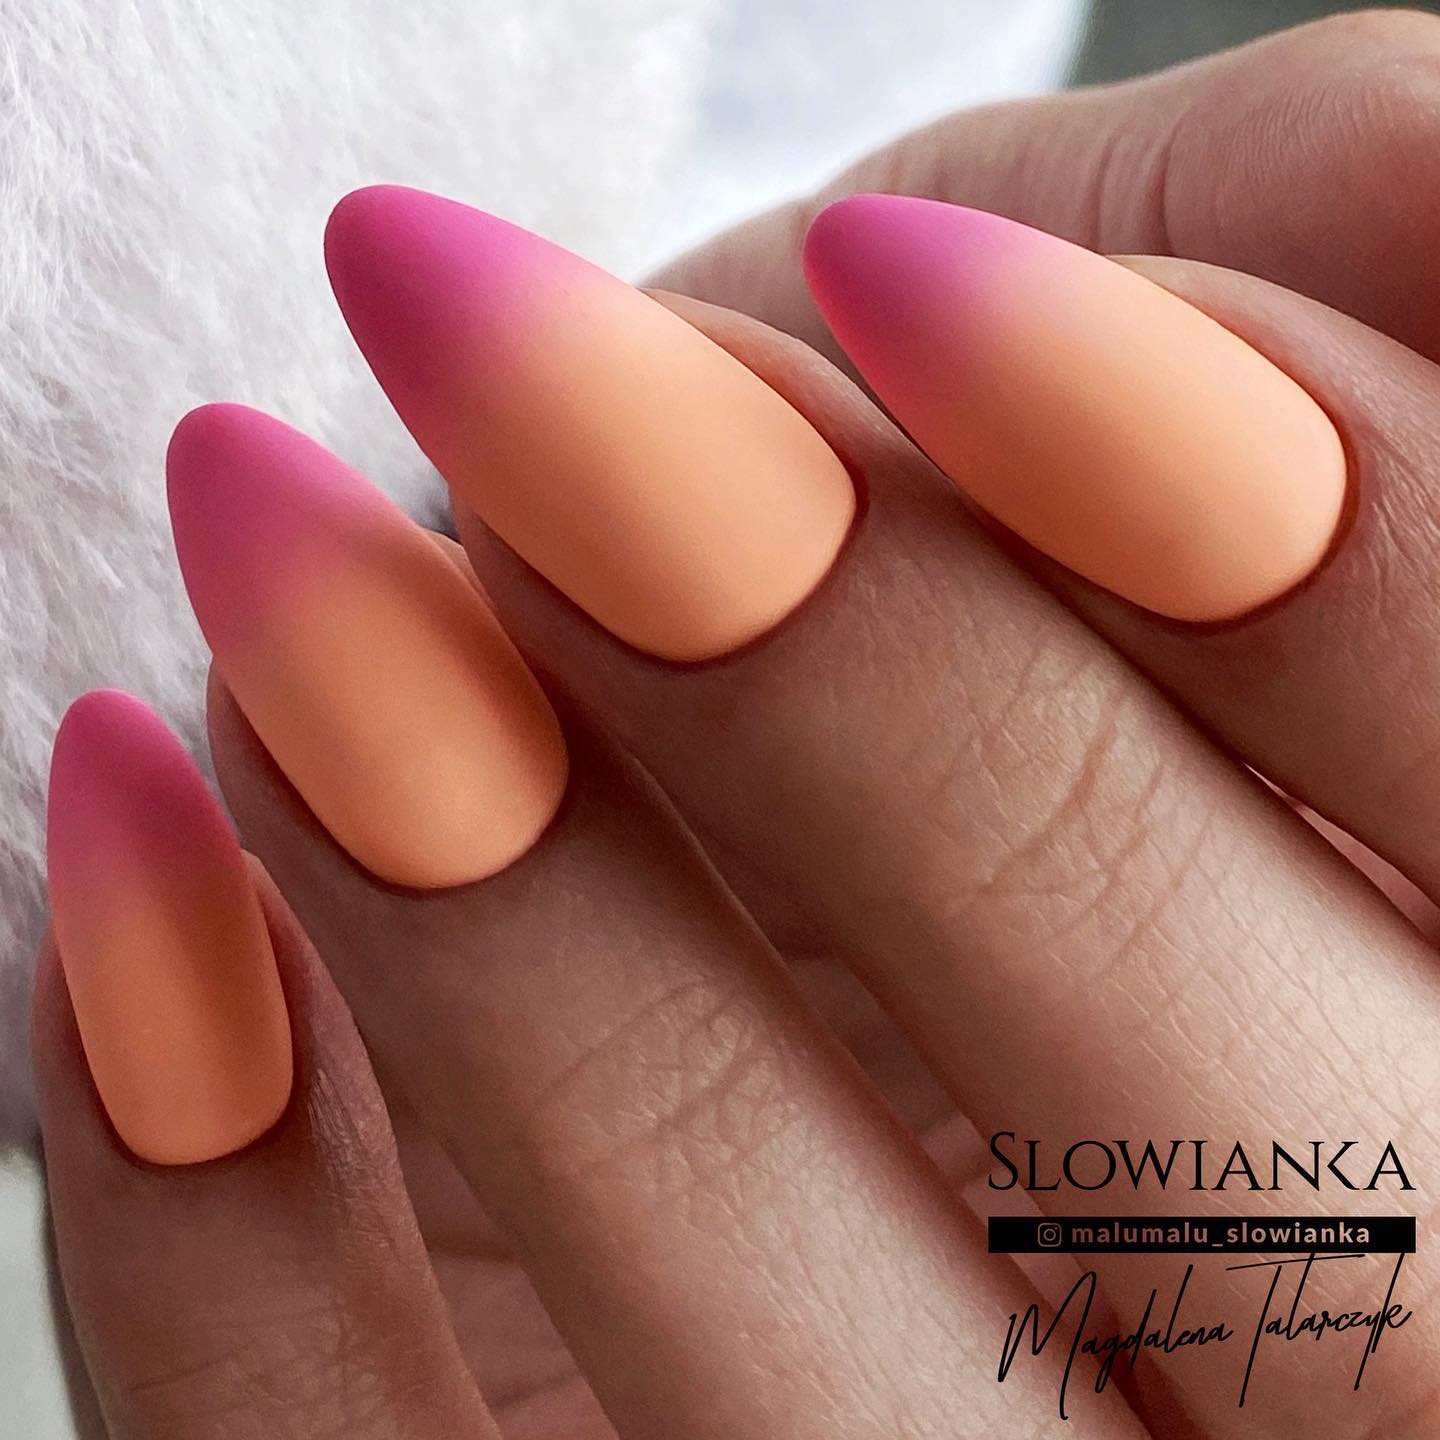 Matte ombré nails are way prettier and different than your typical other nails, don’t you agree? Give it a go with this color combo if you fancy intriguing options.